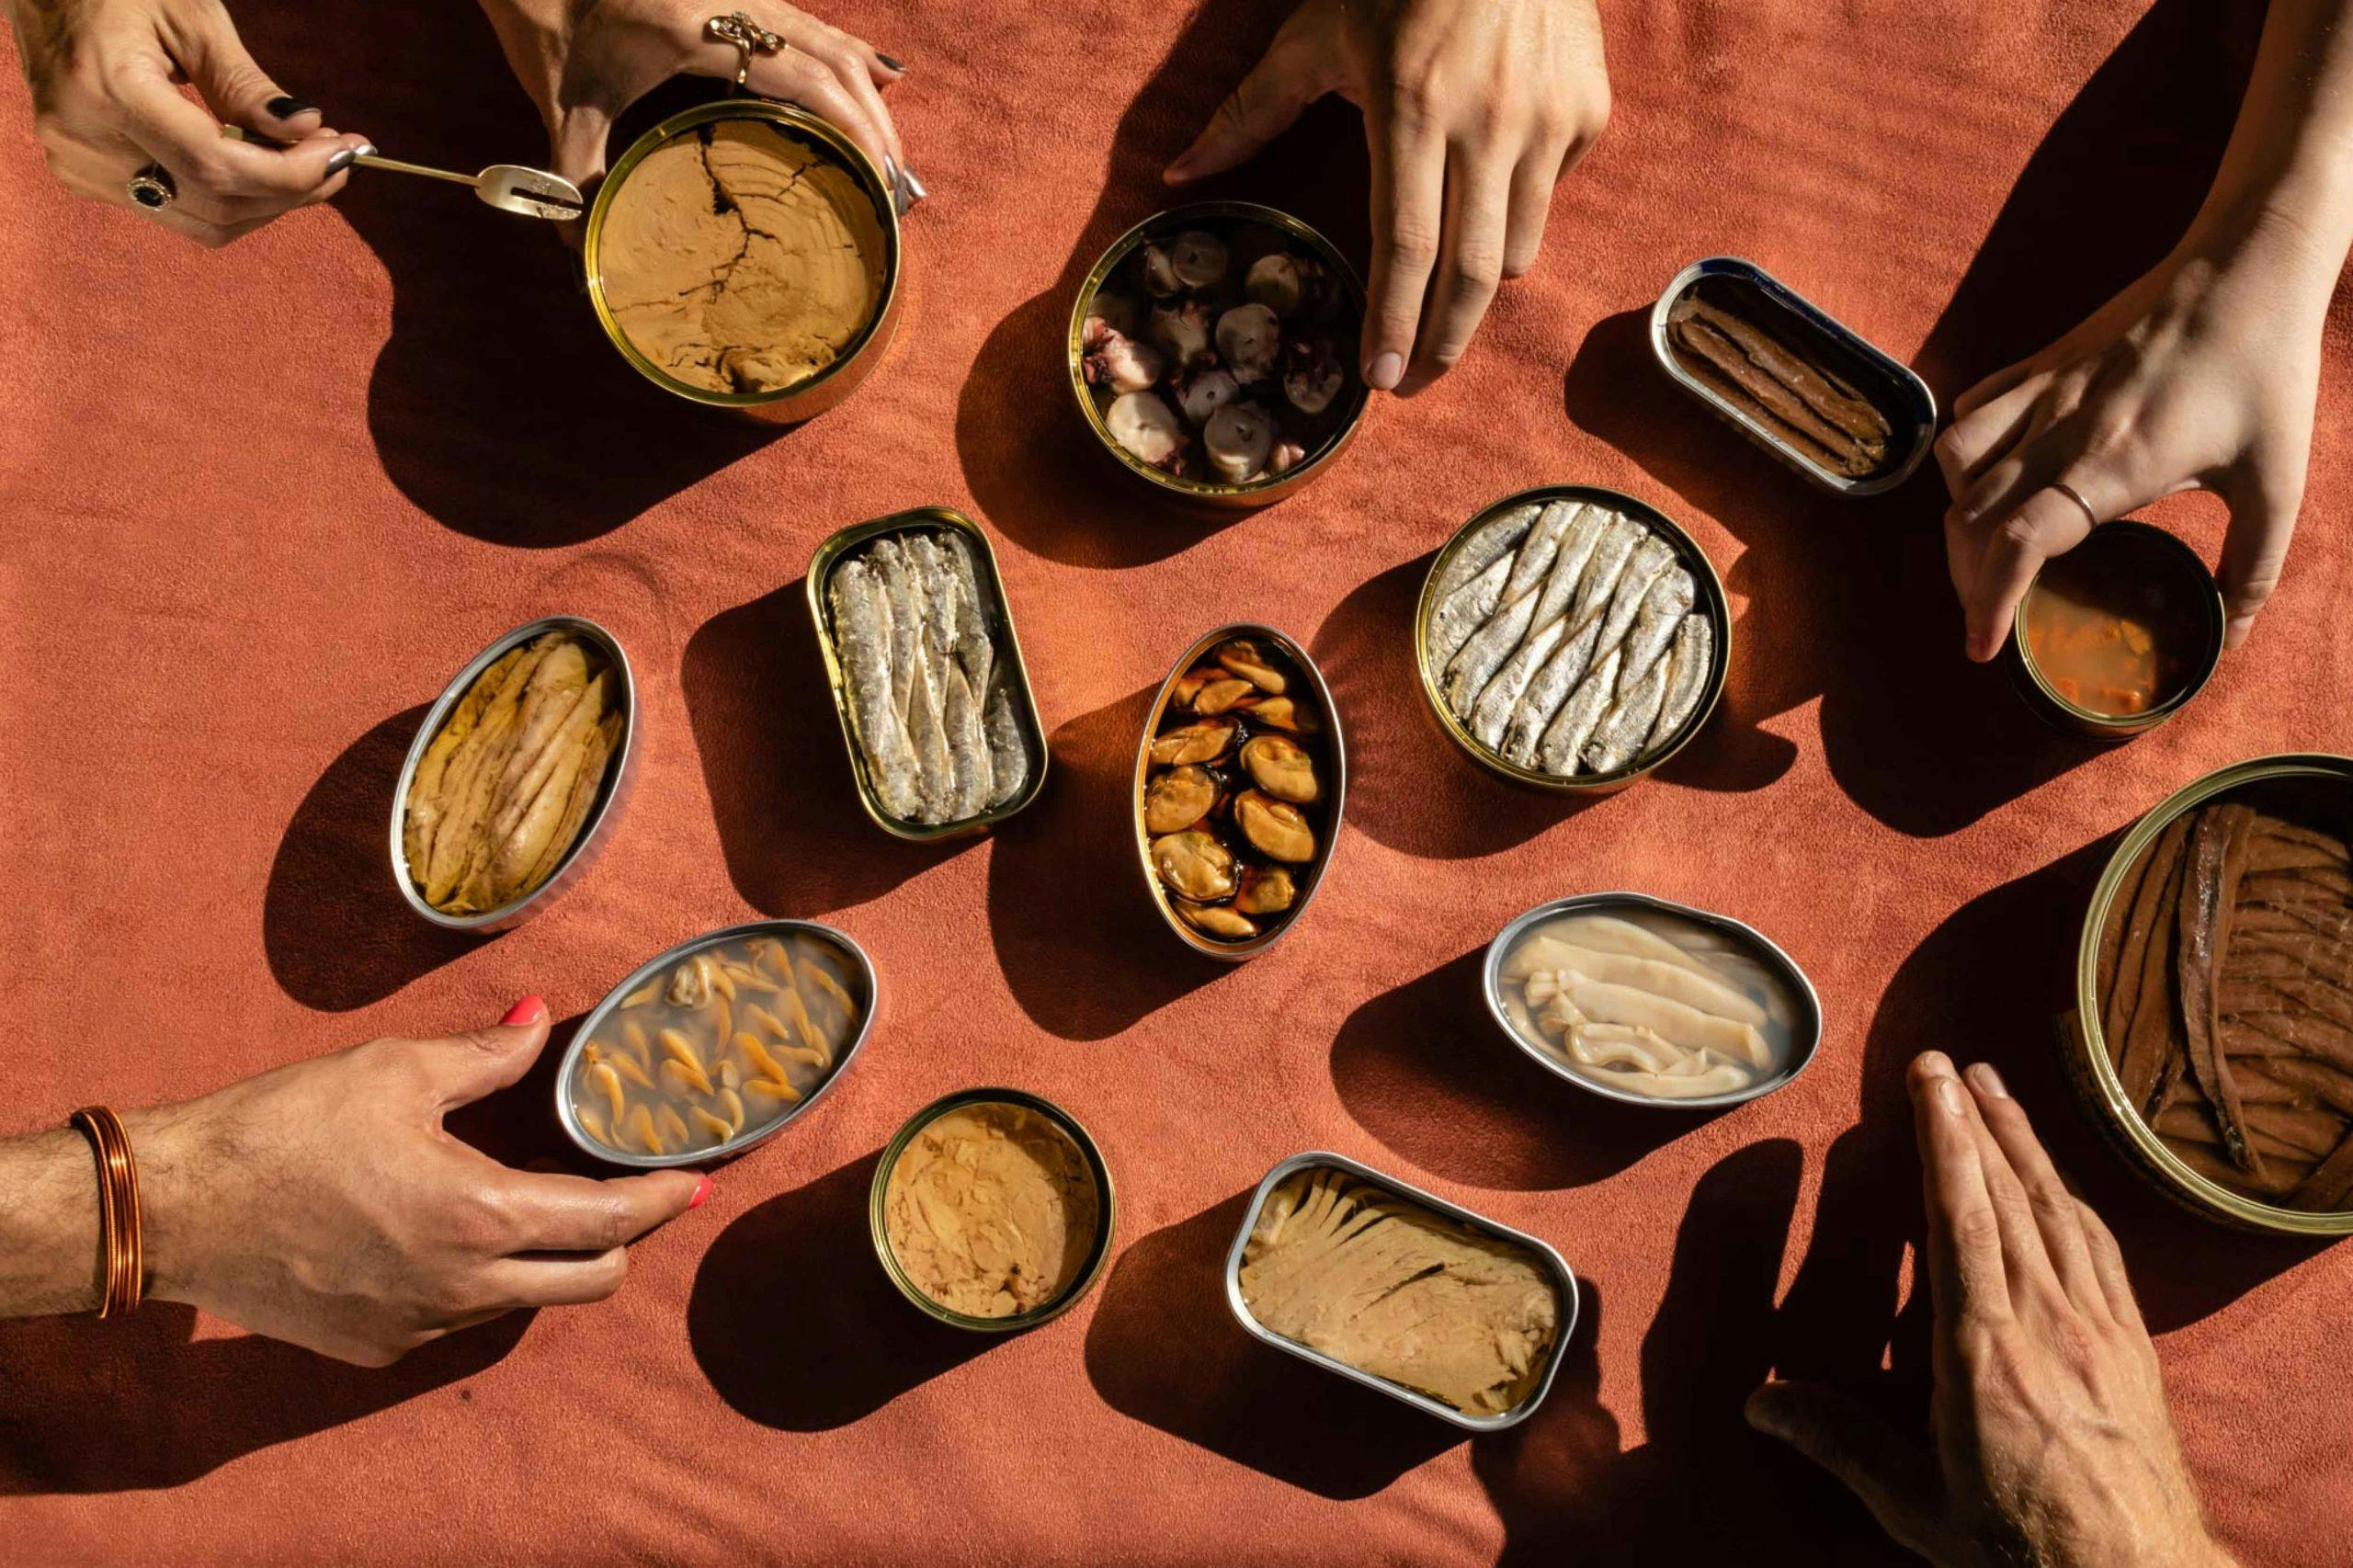 People gathered around a table sharing stylishly-packaged, shelf-stable foods